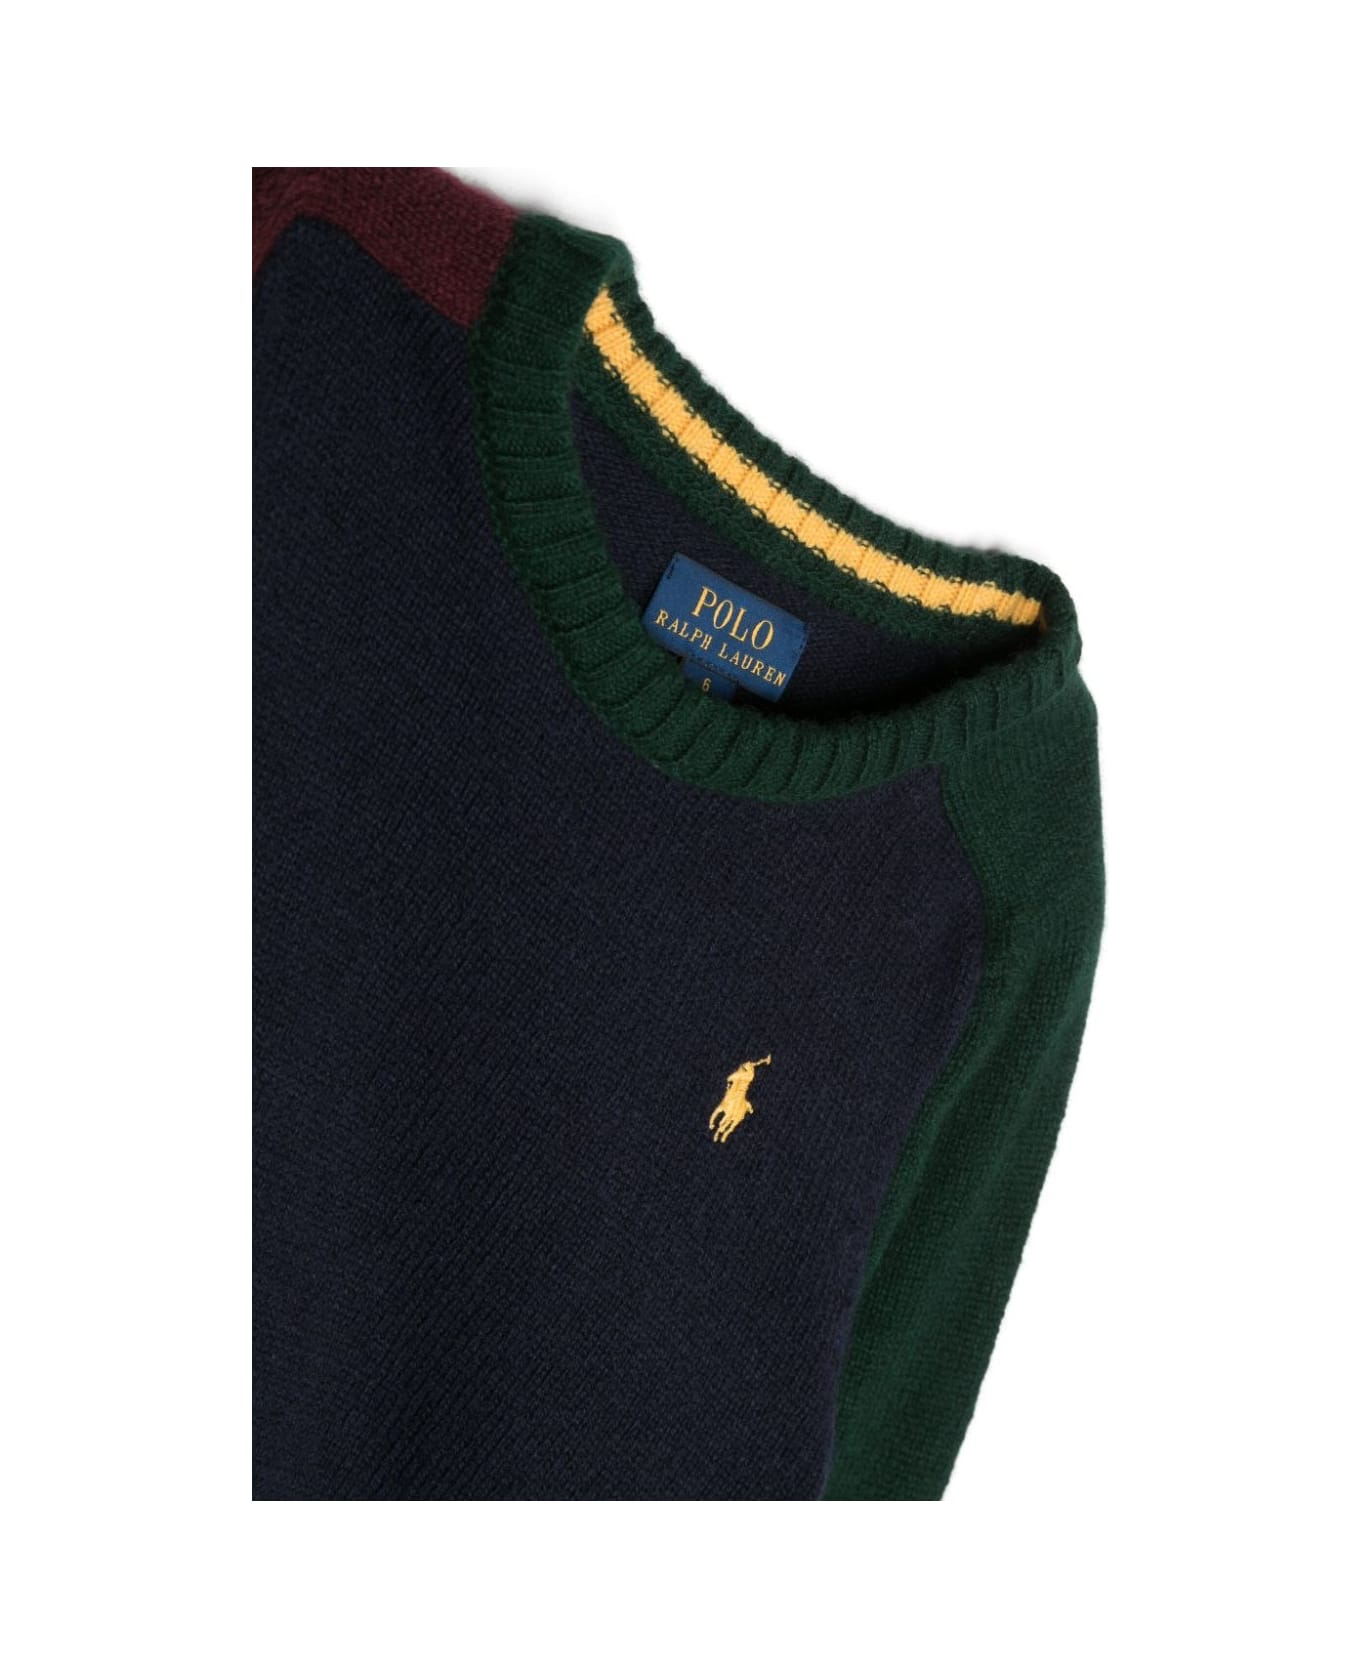 Ralph Lauren Red, Blue And Green Wool And Cashmere Pullover - MULTICOLOR